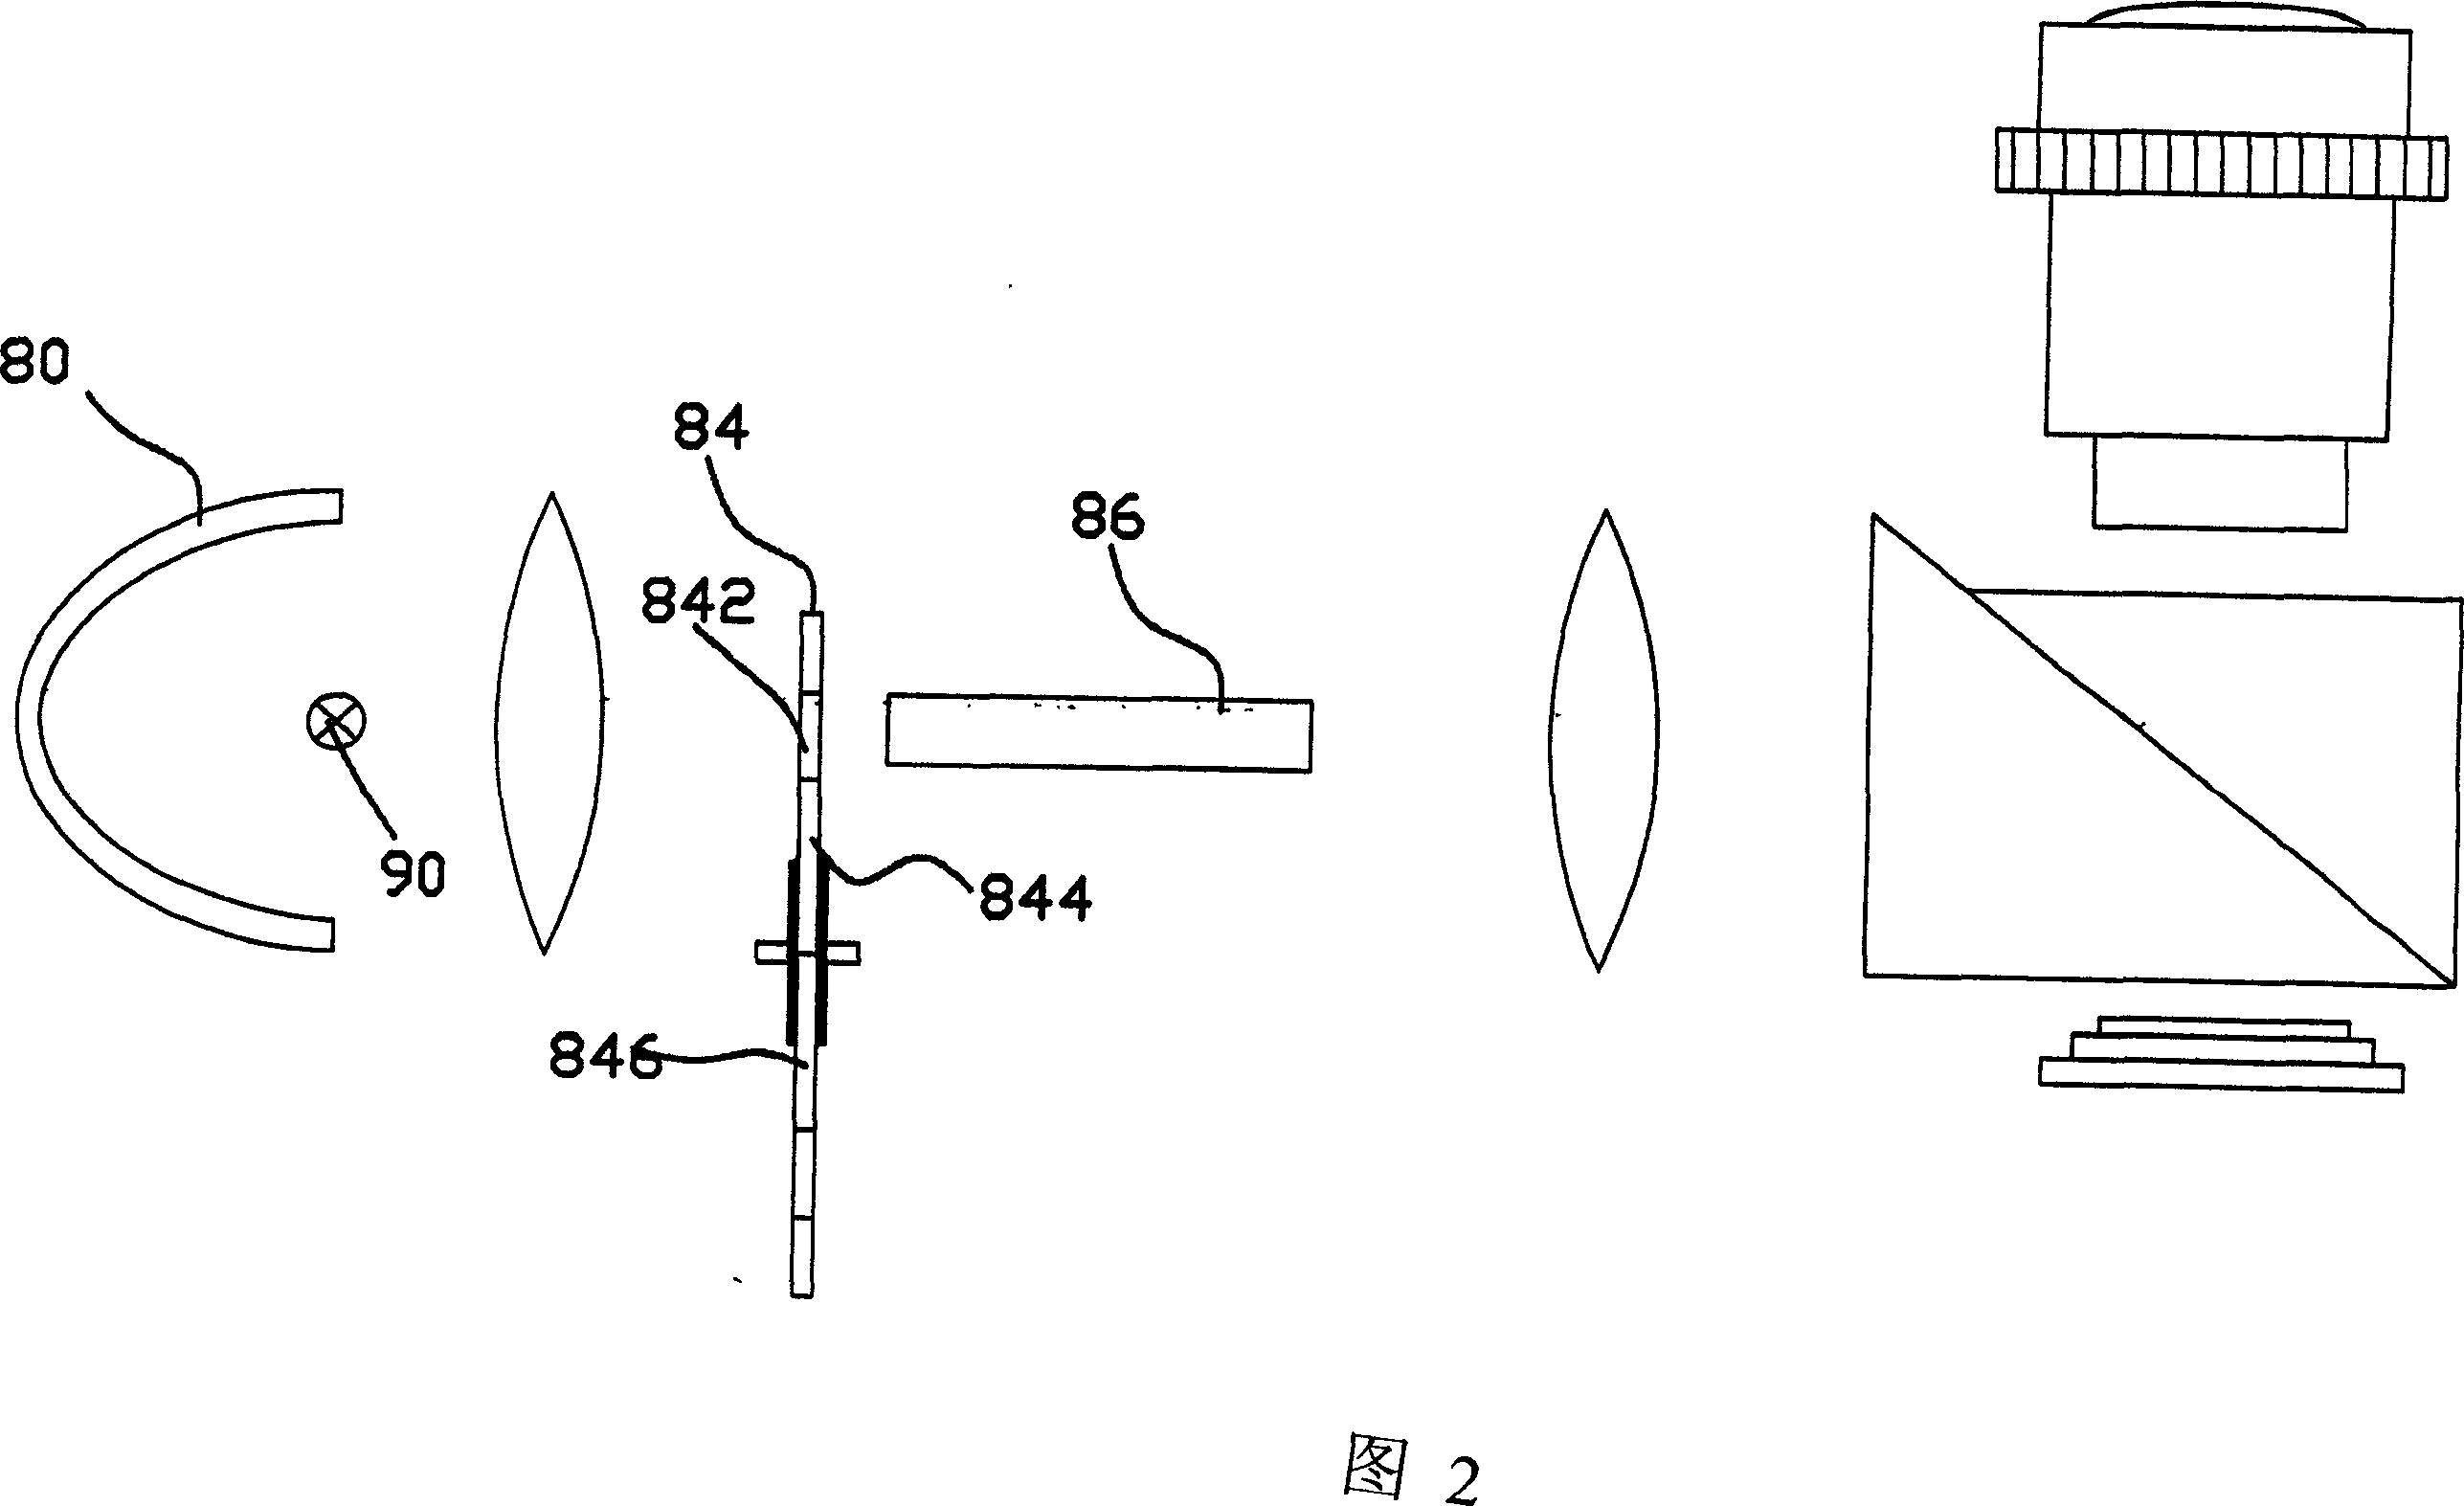 Low frequency reinforcing optic engine used in projection display